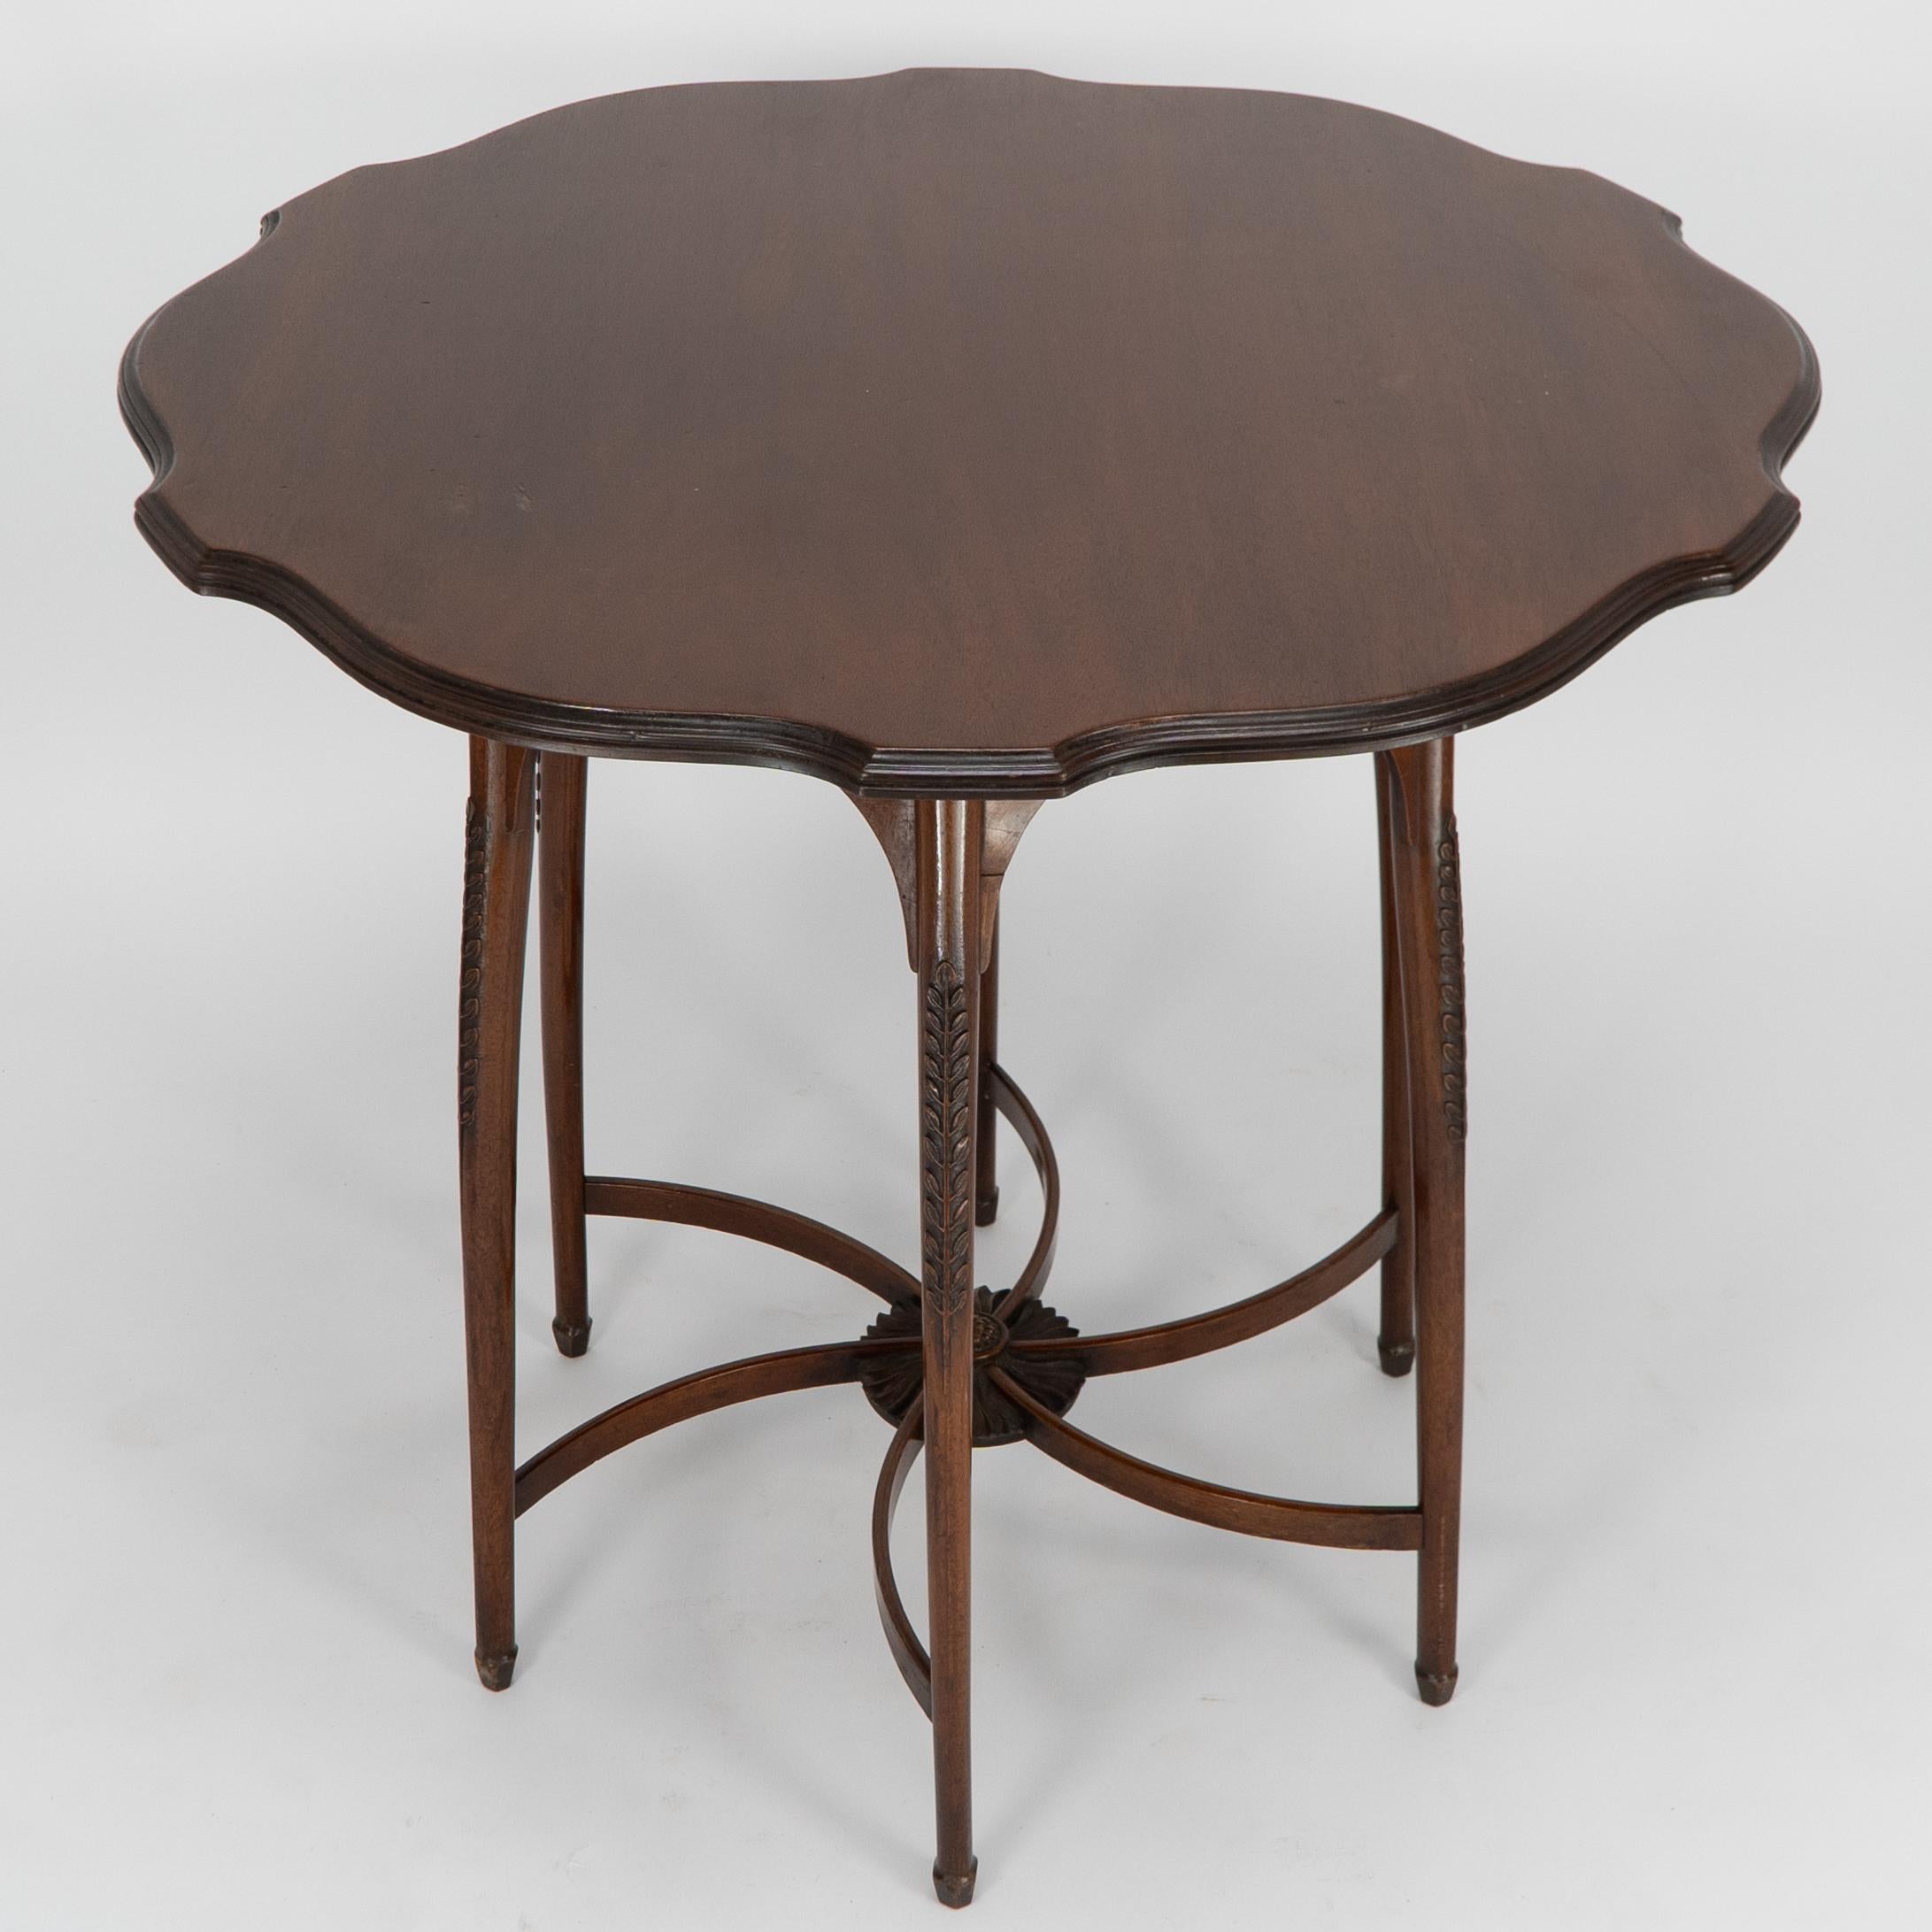 George Jack for Morris and Co. A high Aesthetic Movement circular side table In Good Condition For Sale In London, GB